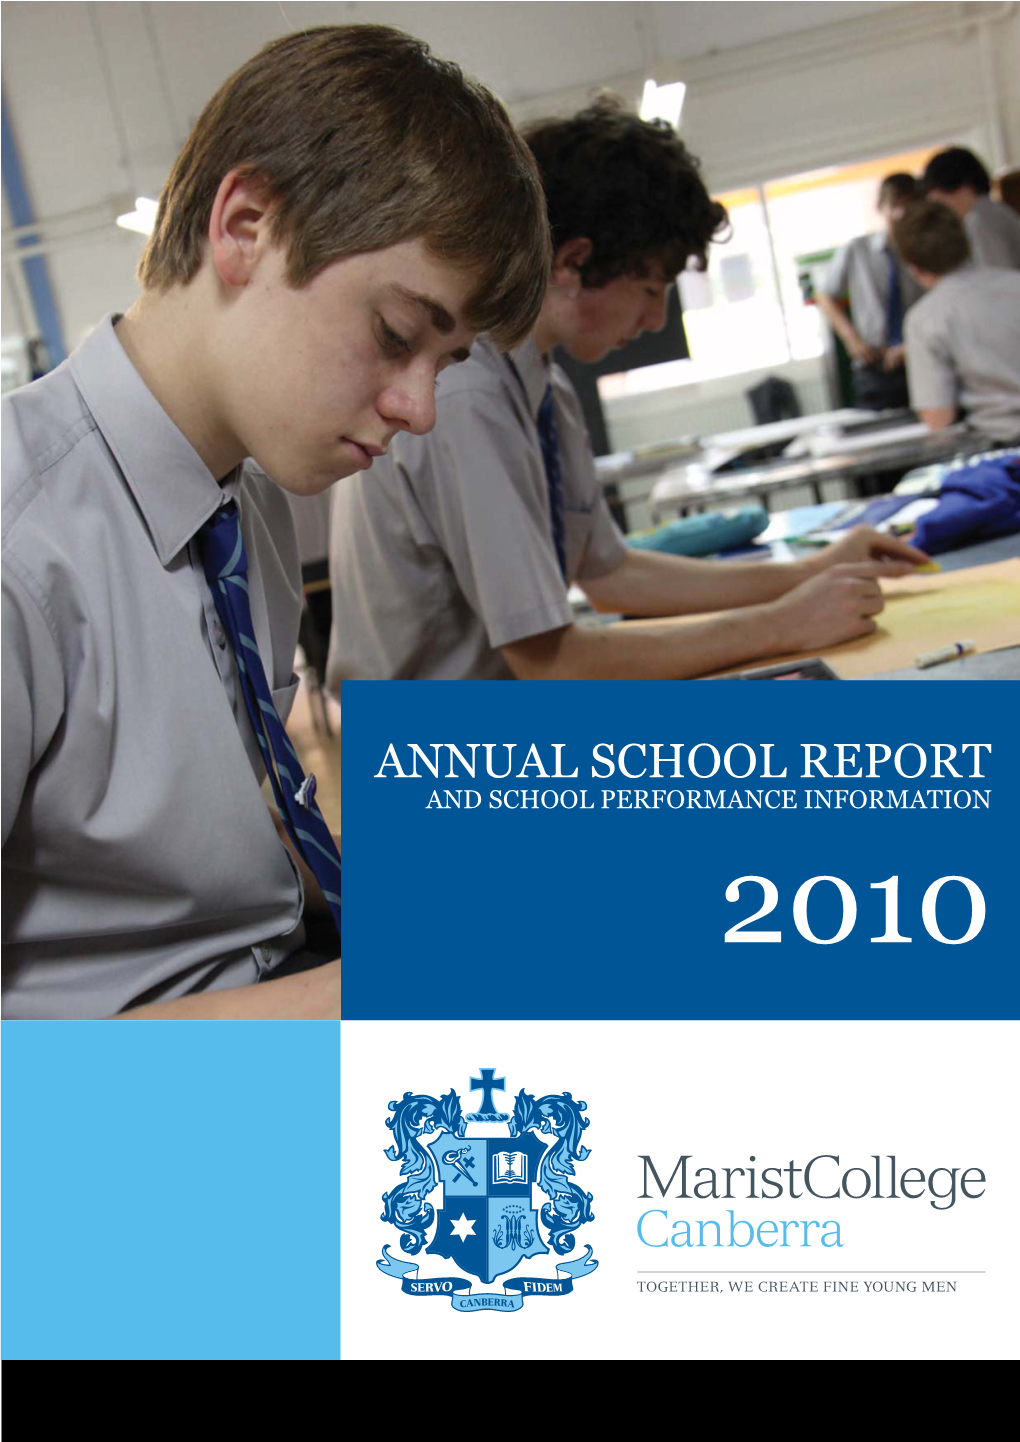 Annual School Report and School Performance Information 2010